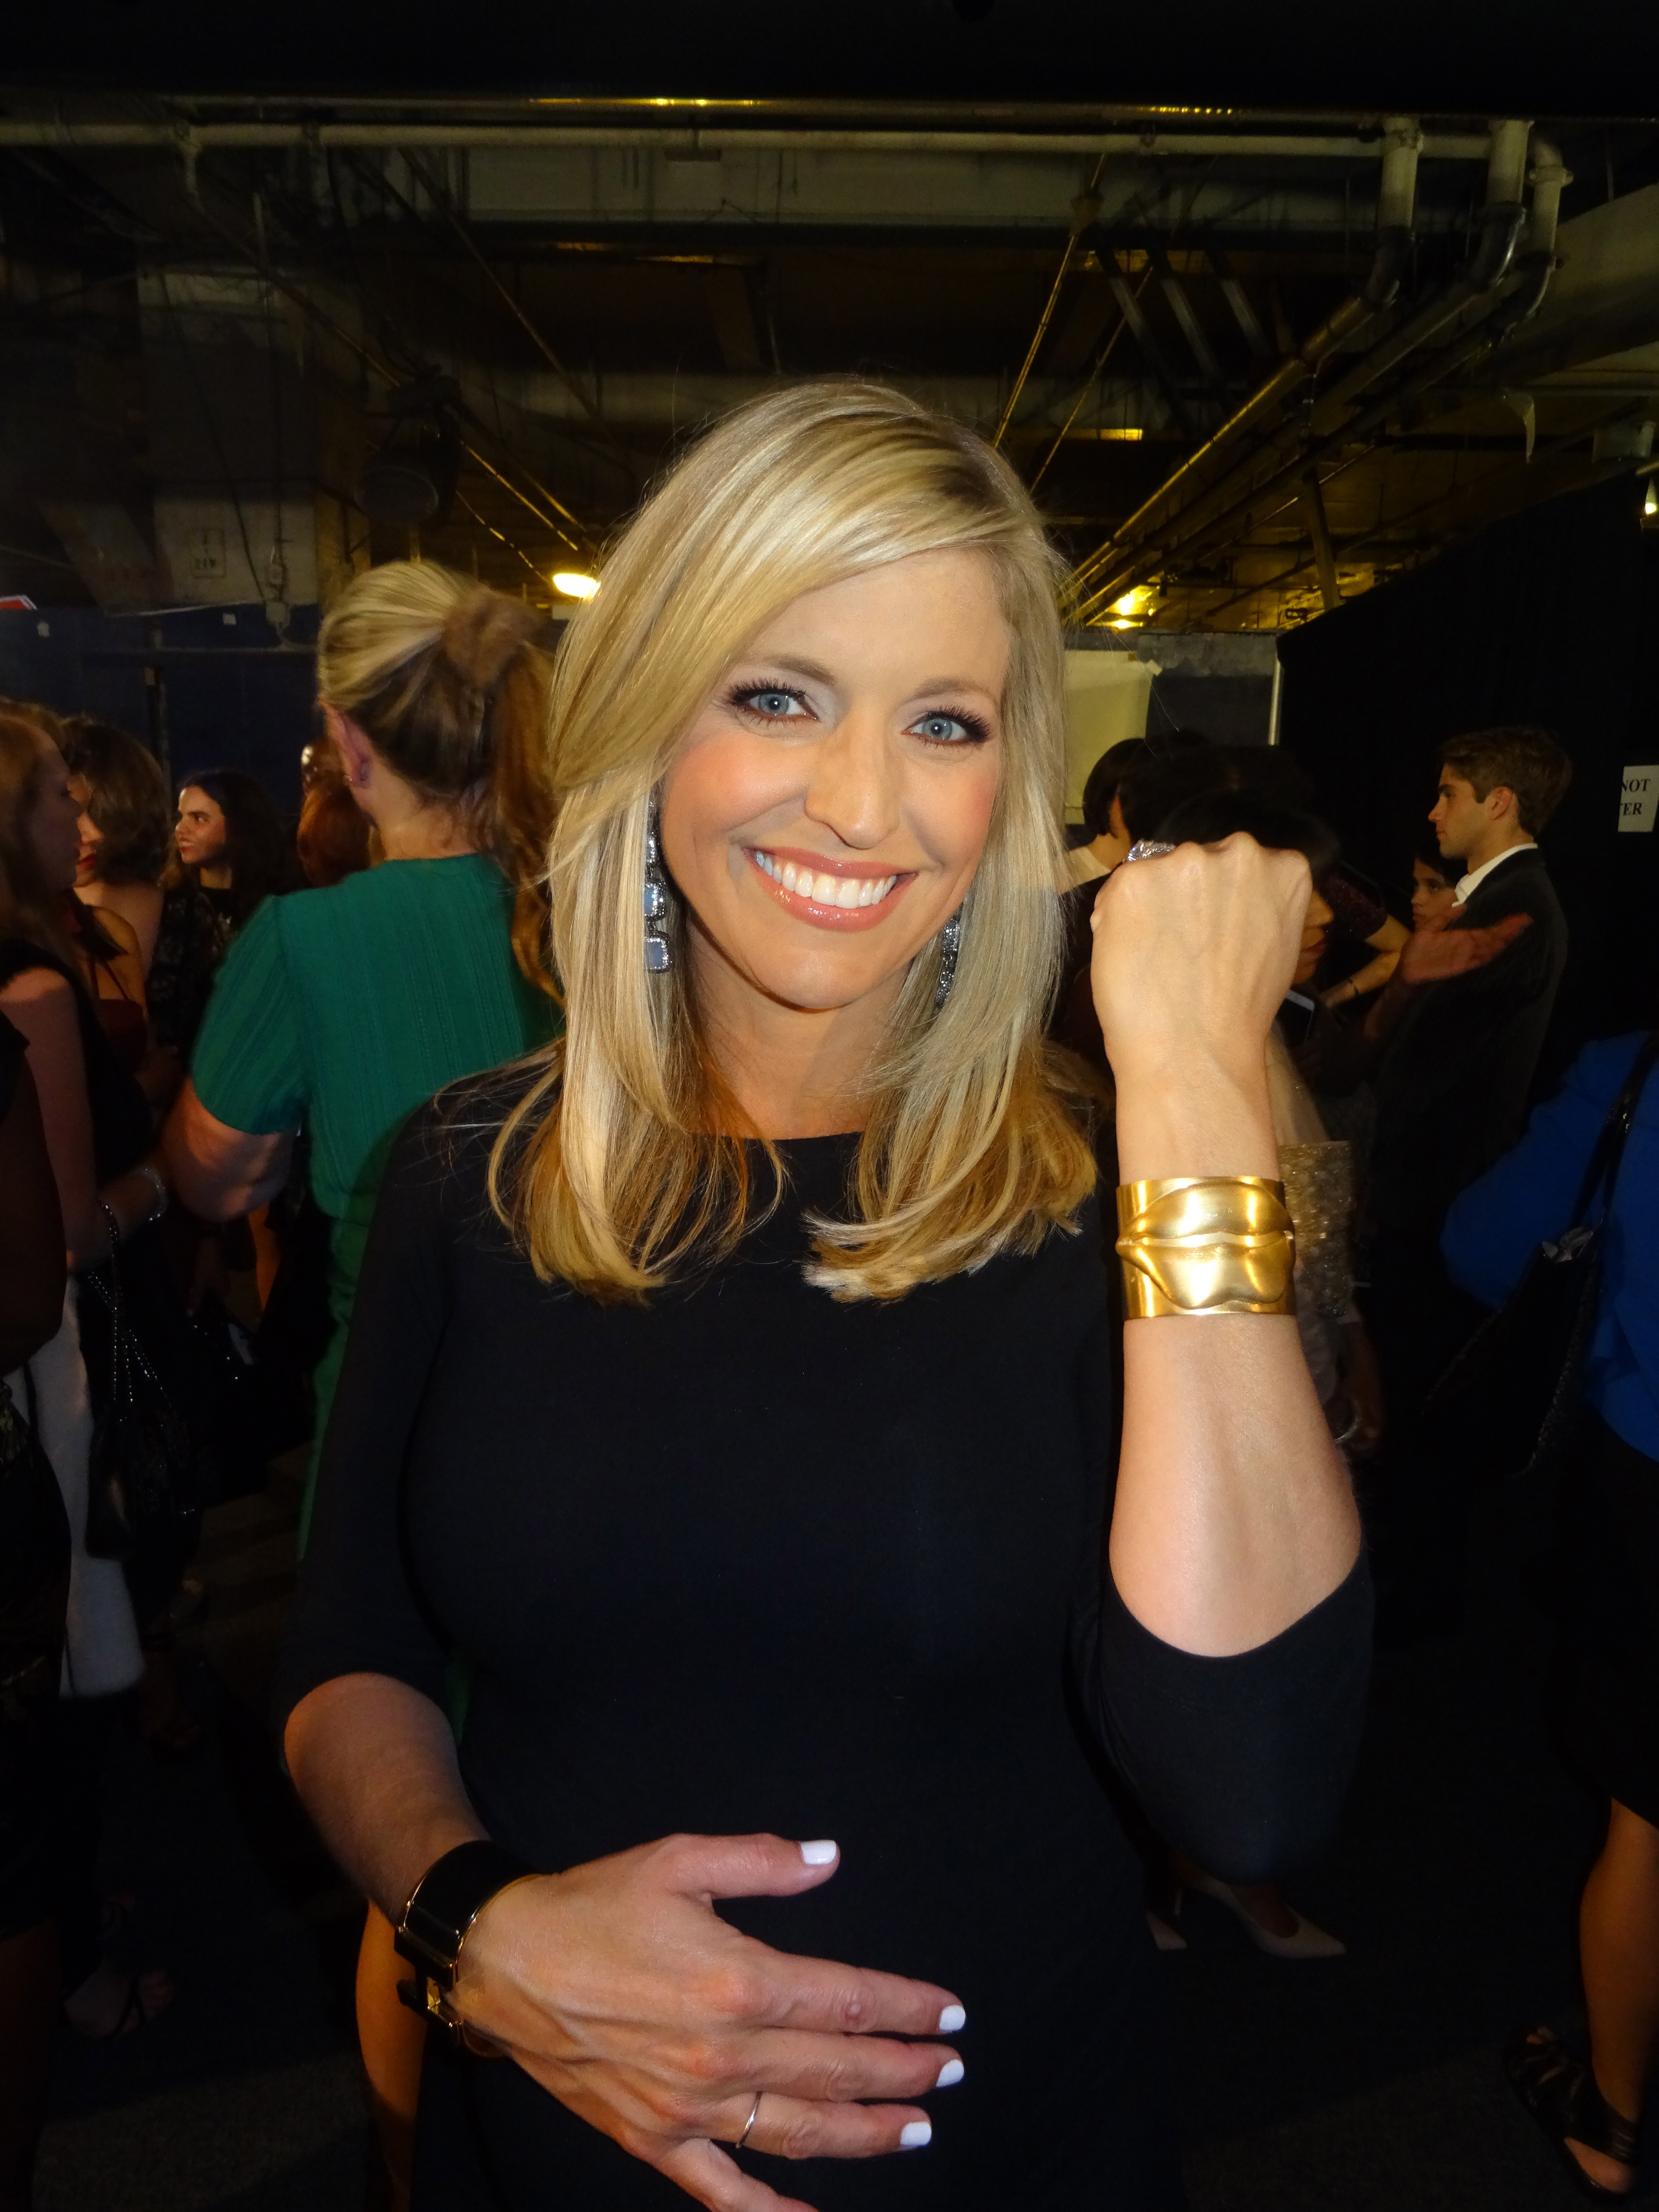 Ainsley Earhardt of Fox & Friends wearing her 'Speak Out Against